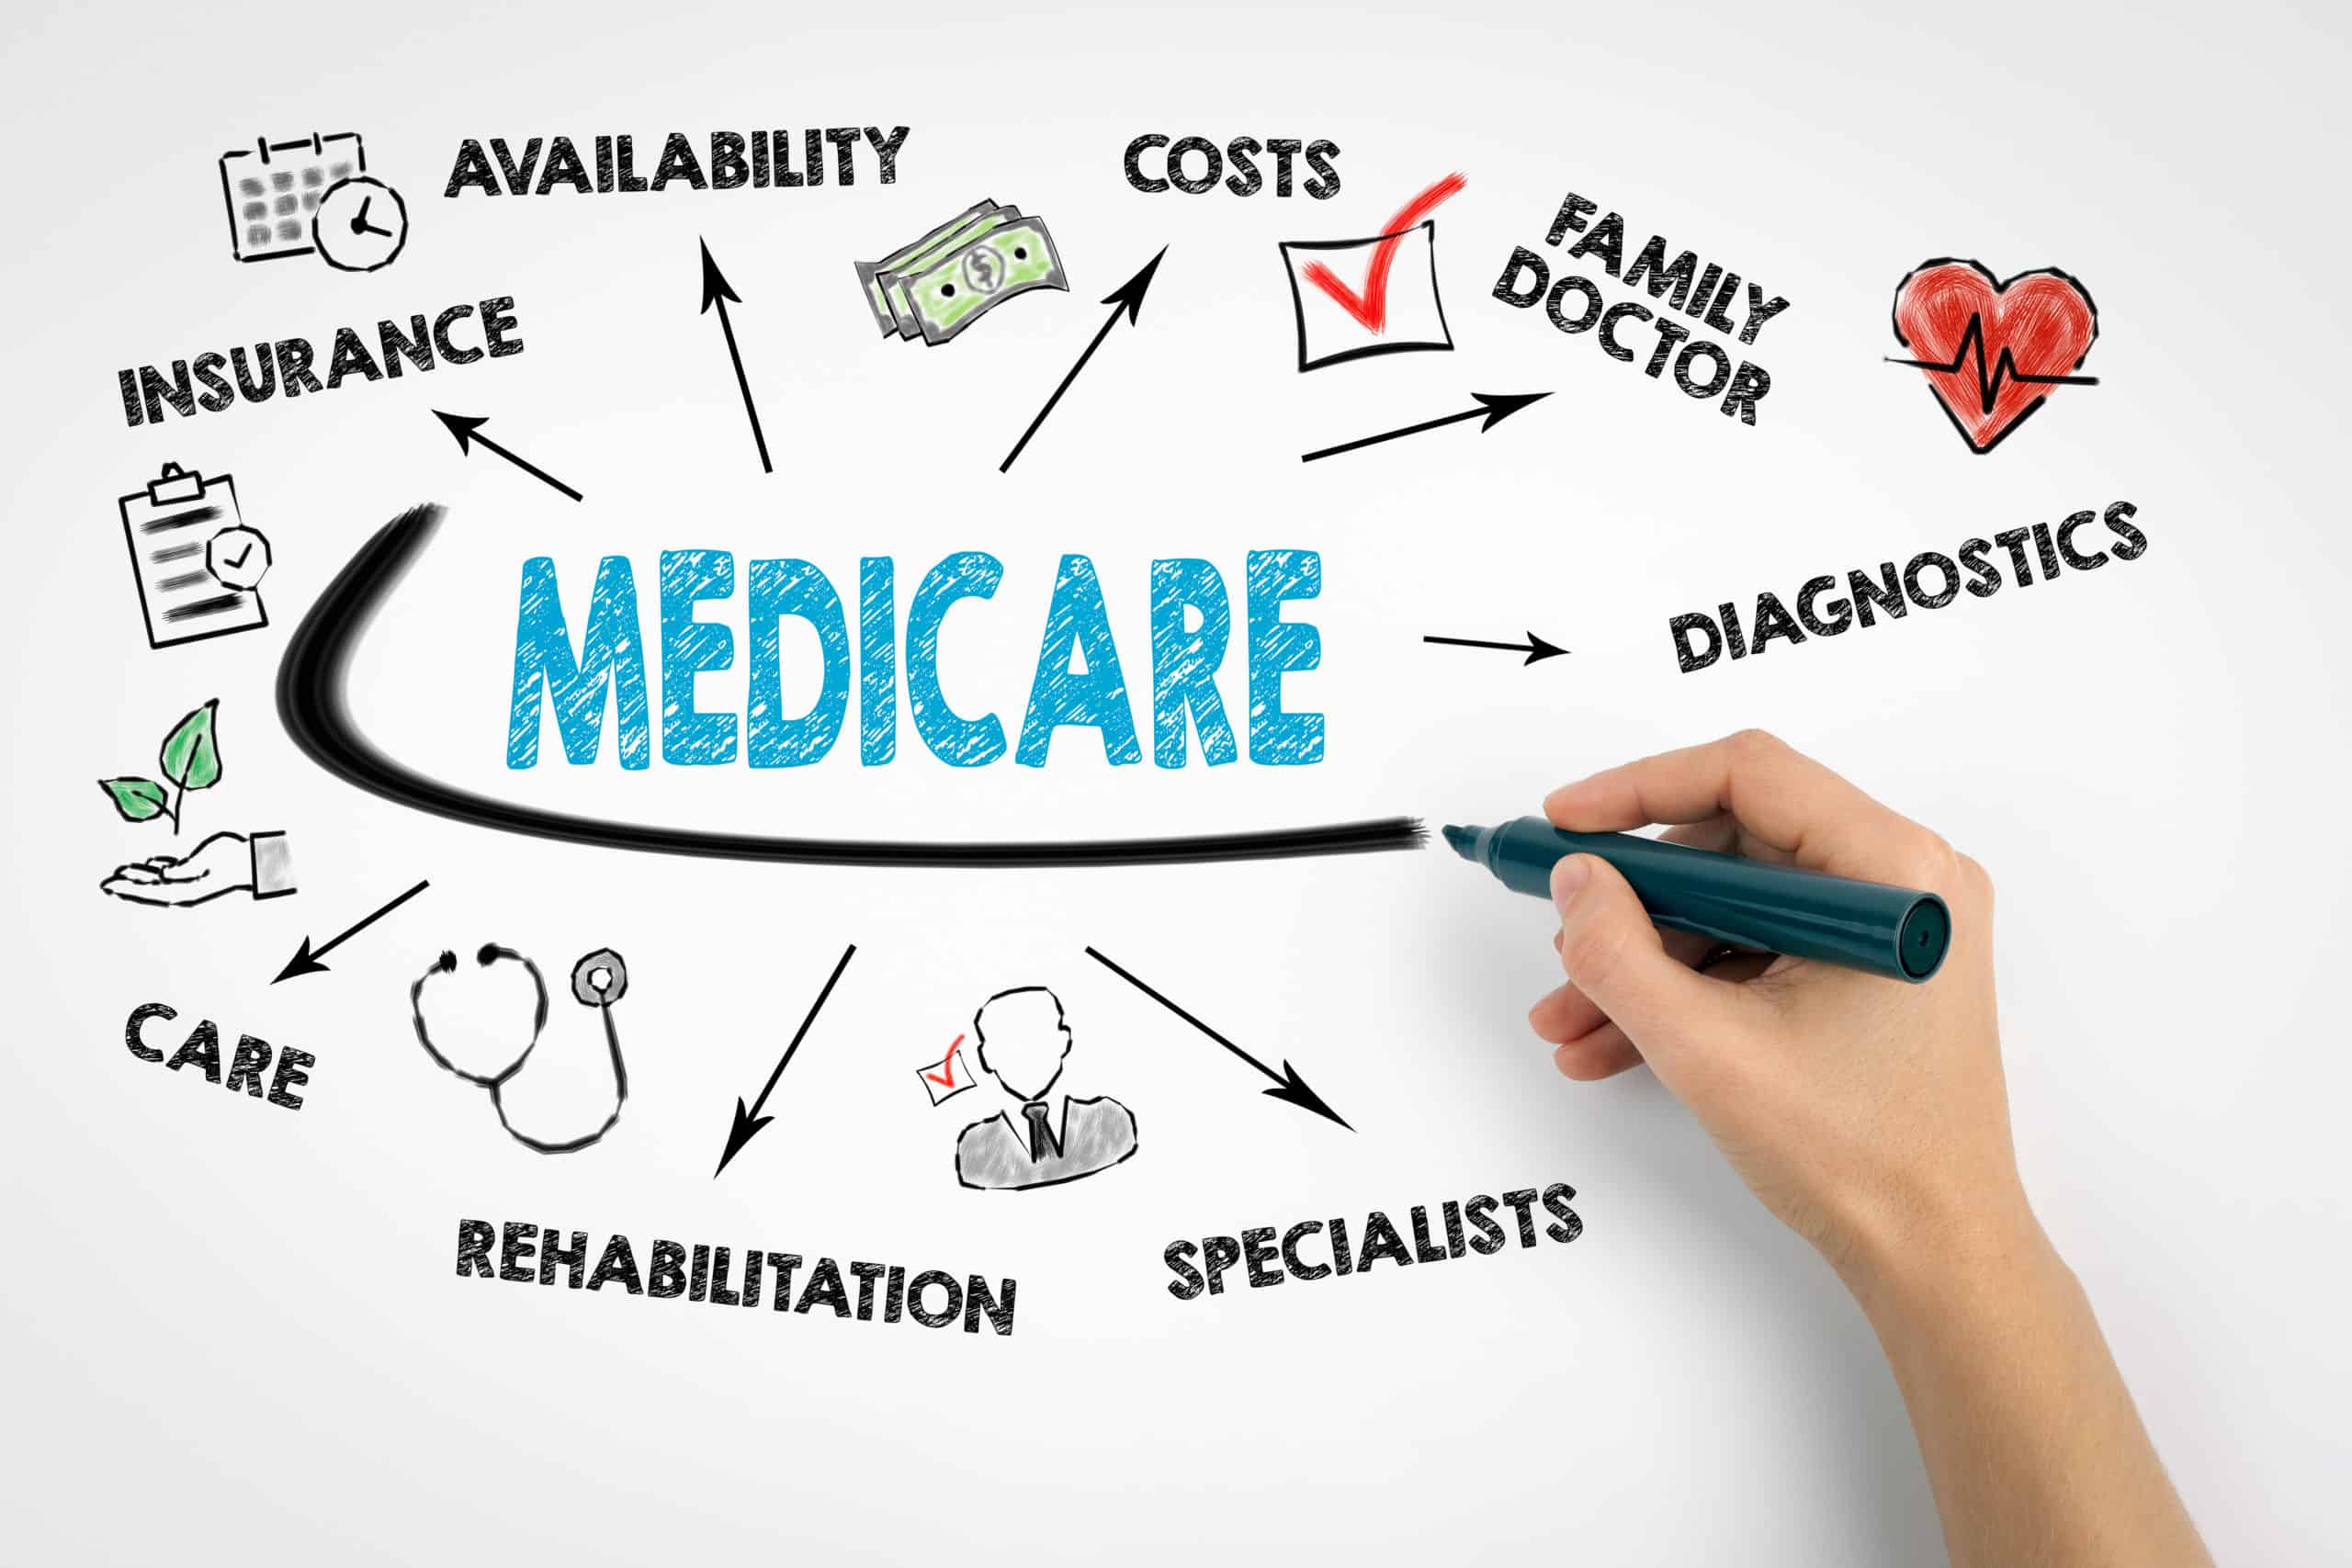 How to Change or Switch Medicare Plans? The Medicare Store